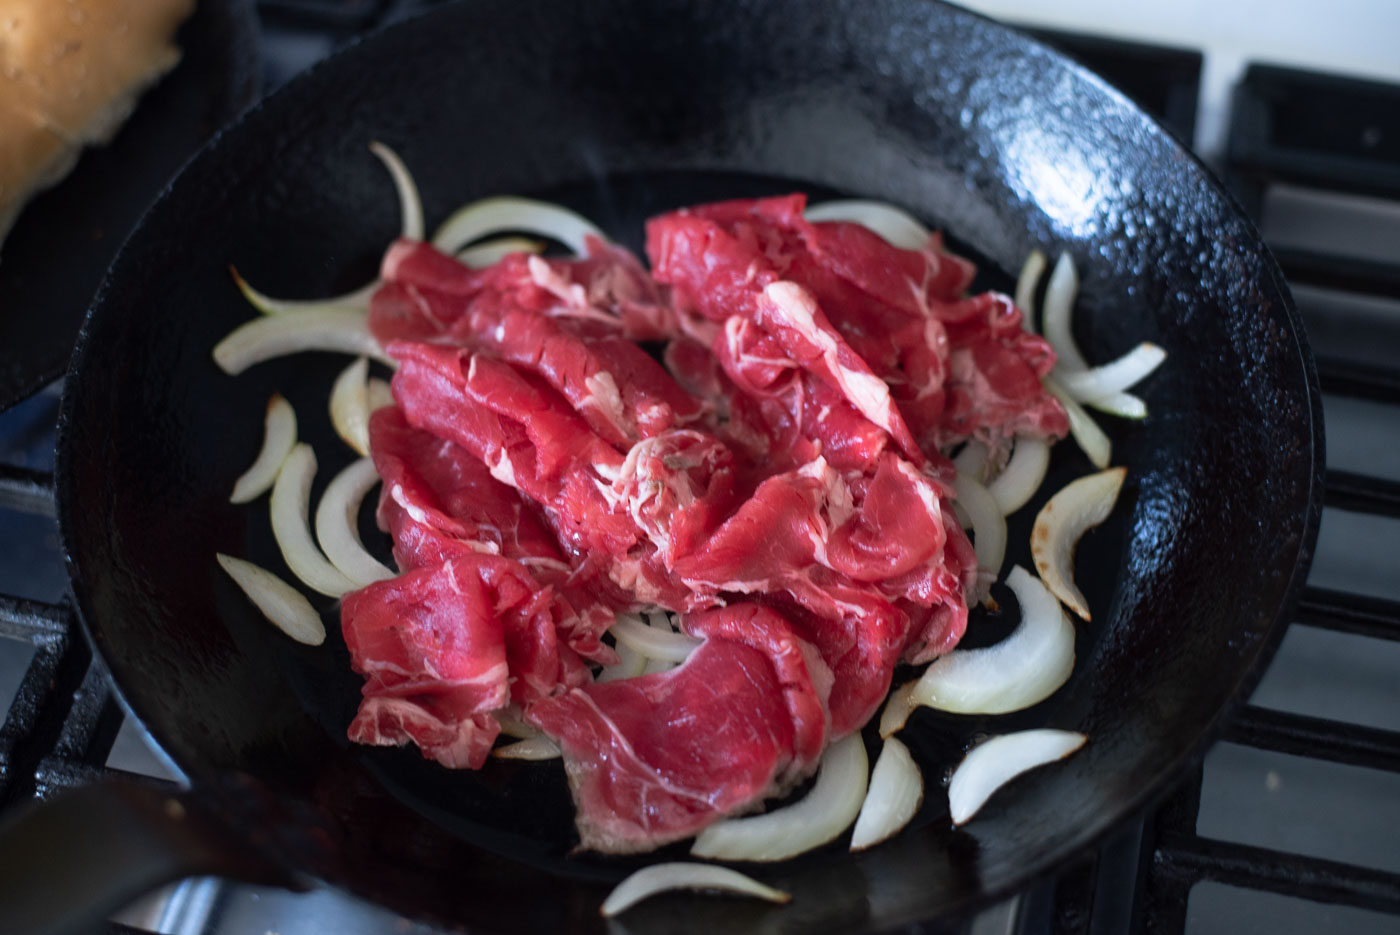 Onion and thin beef slices are cooking in a skillet.